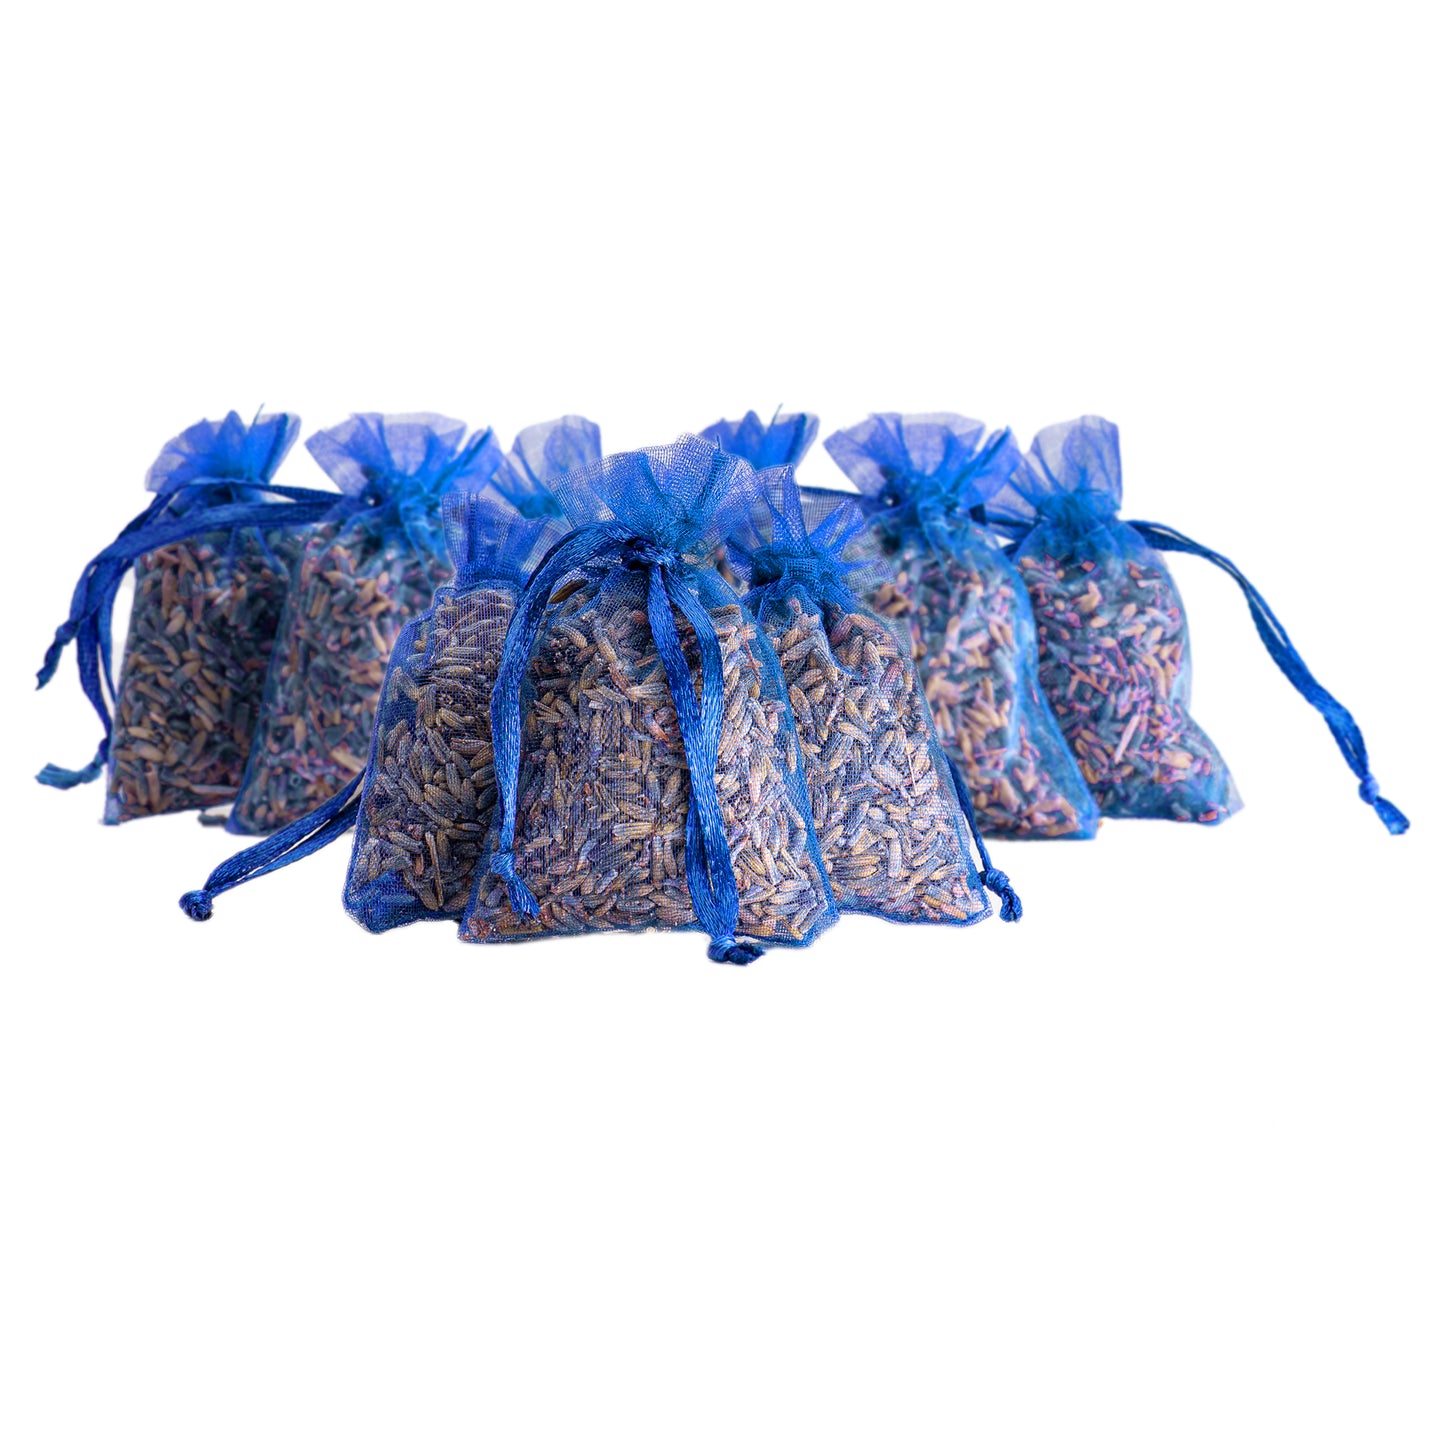 Lavender scented sachets, dark purple, 5 x 9 grams. NOW €3.50 DISCOUNT at checkout!!